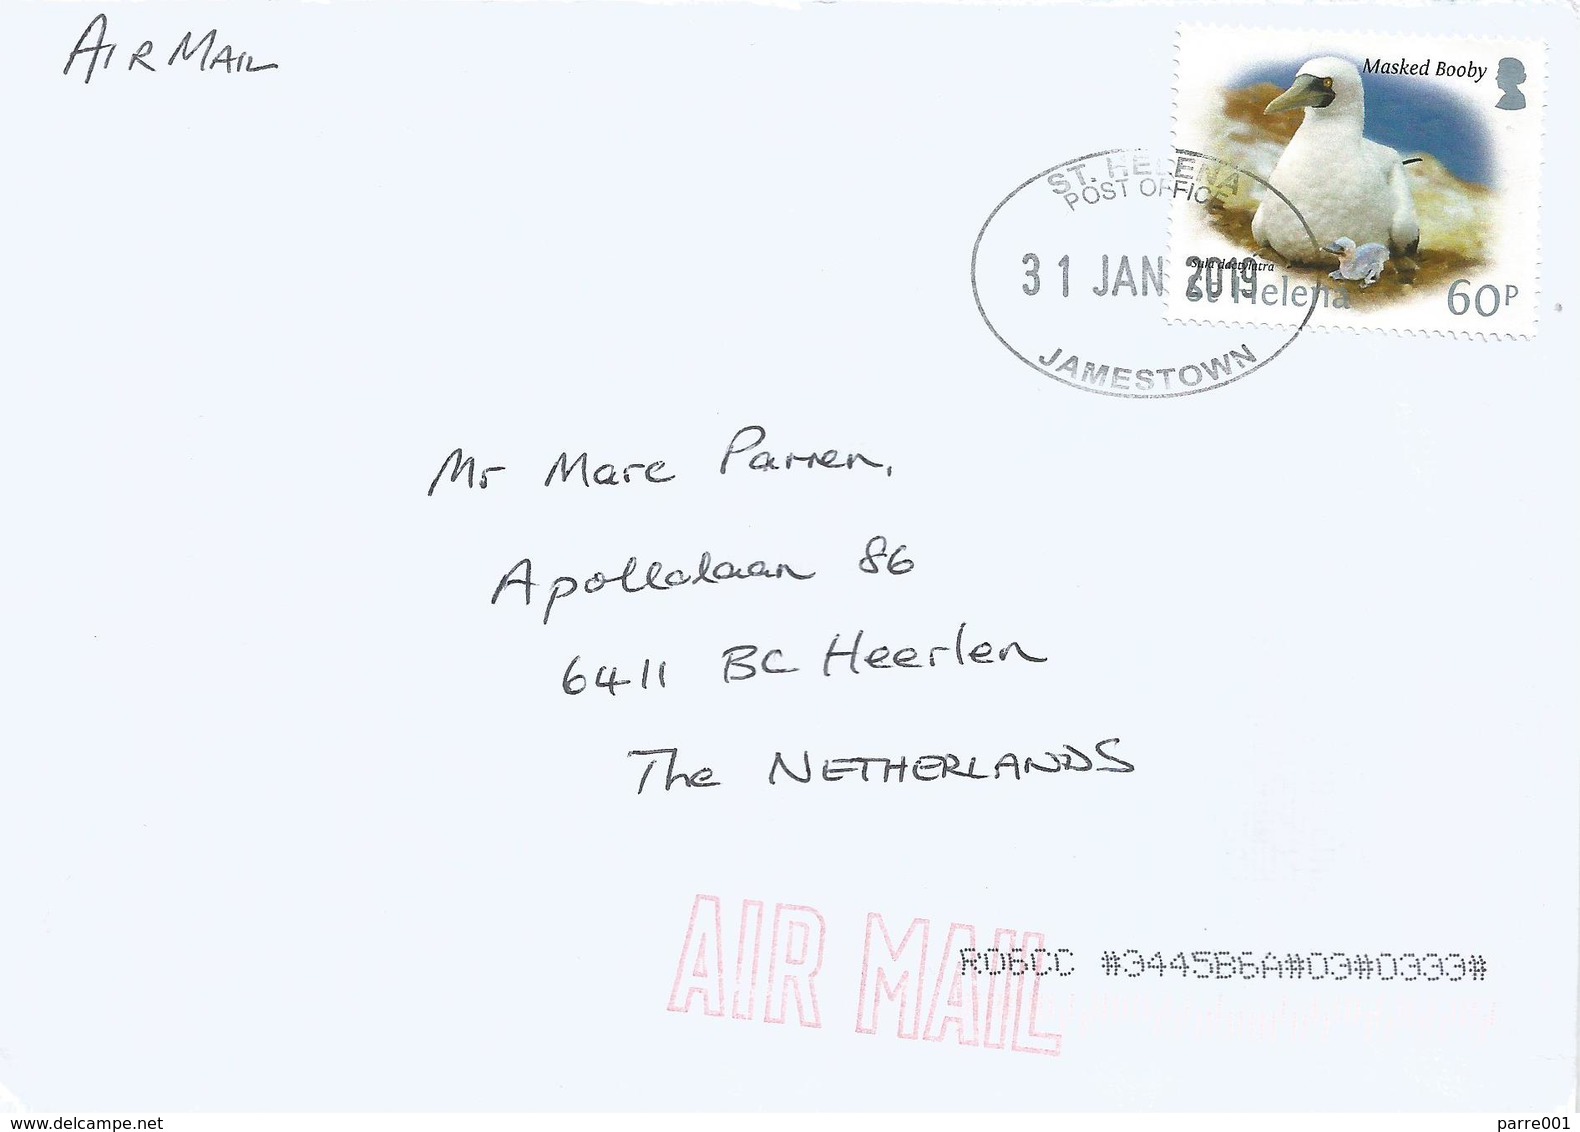 St Helena 2019 Jamestown Masked Booby Air Mail Cover - Sint-Helena